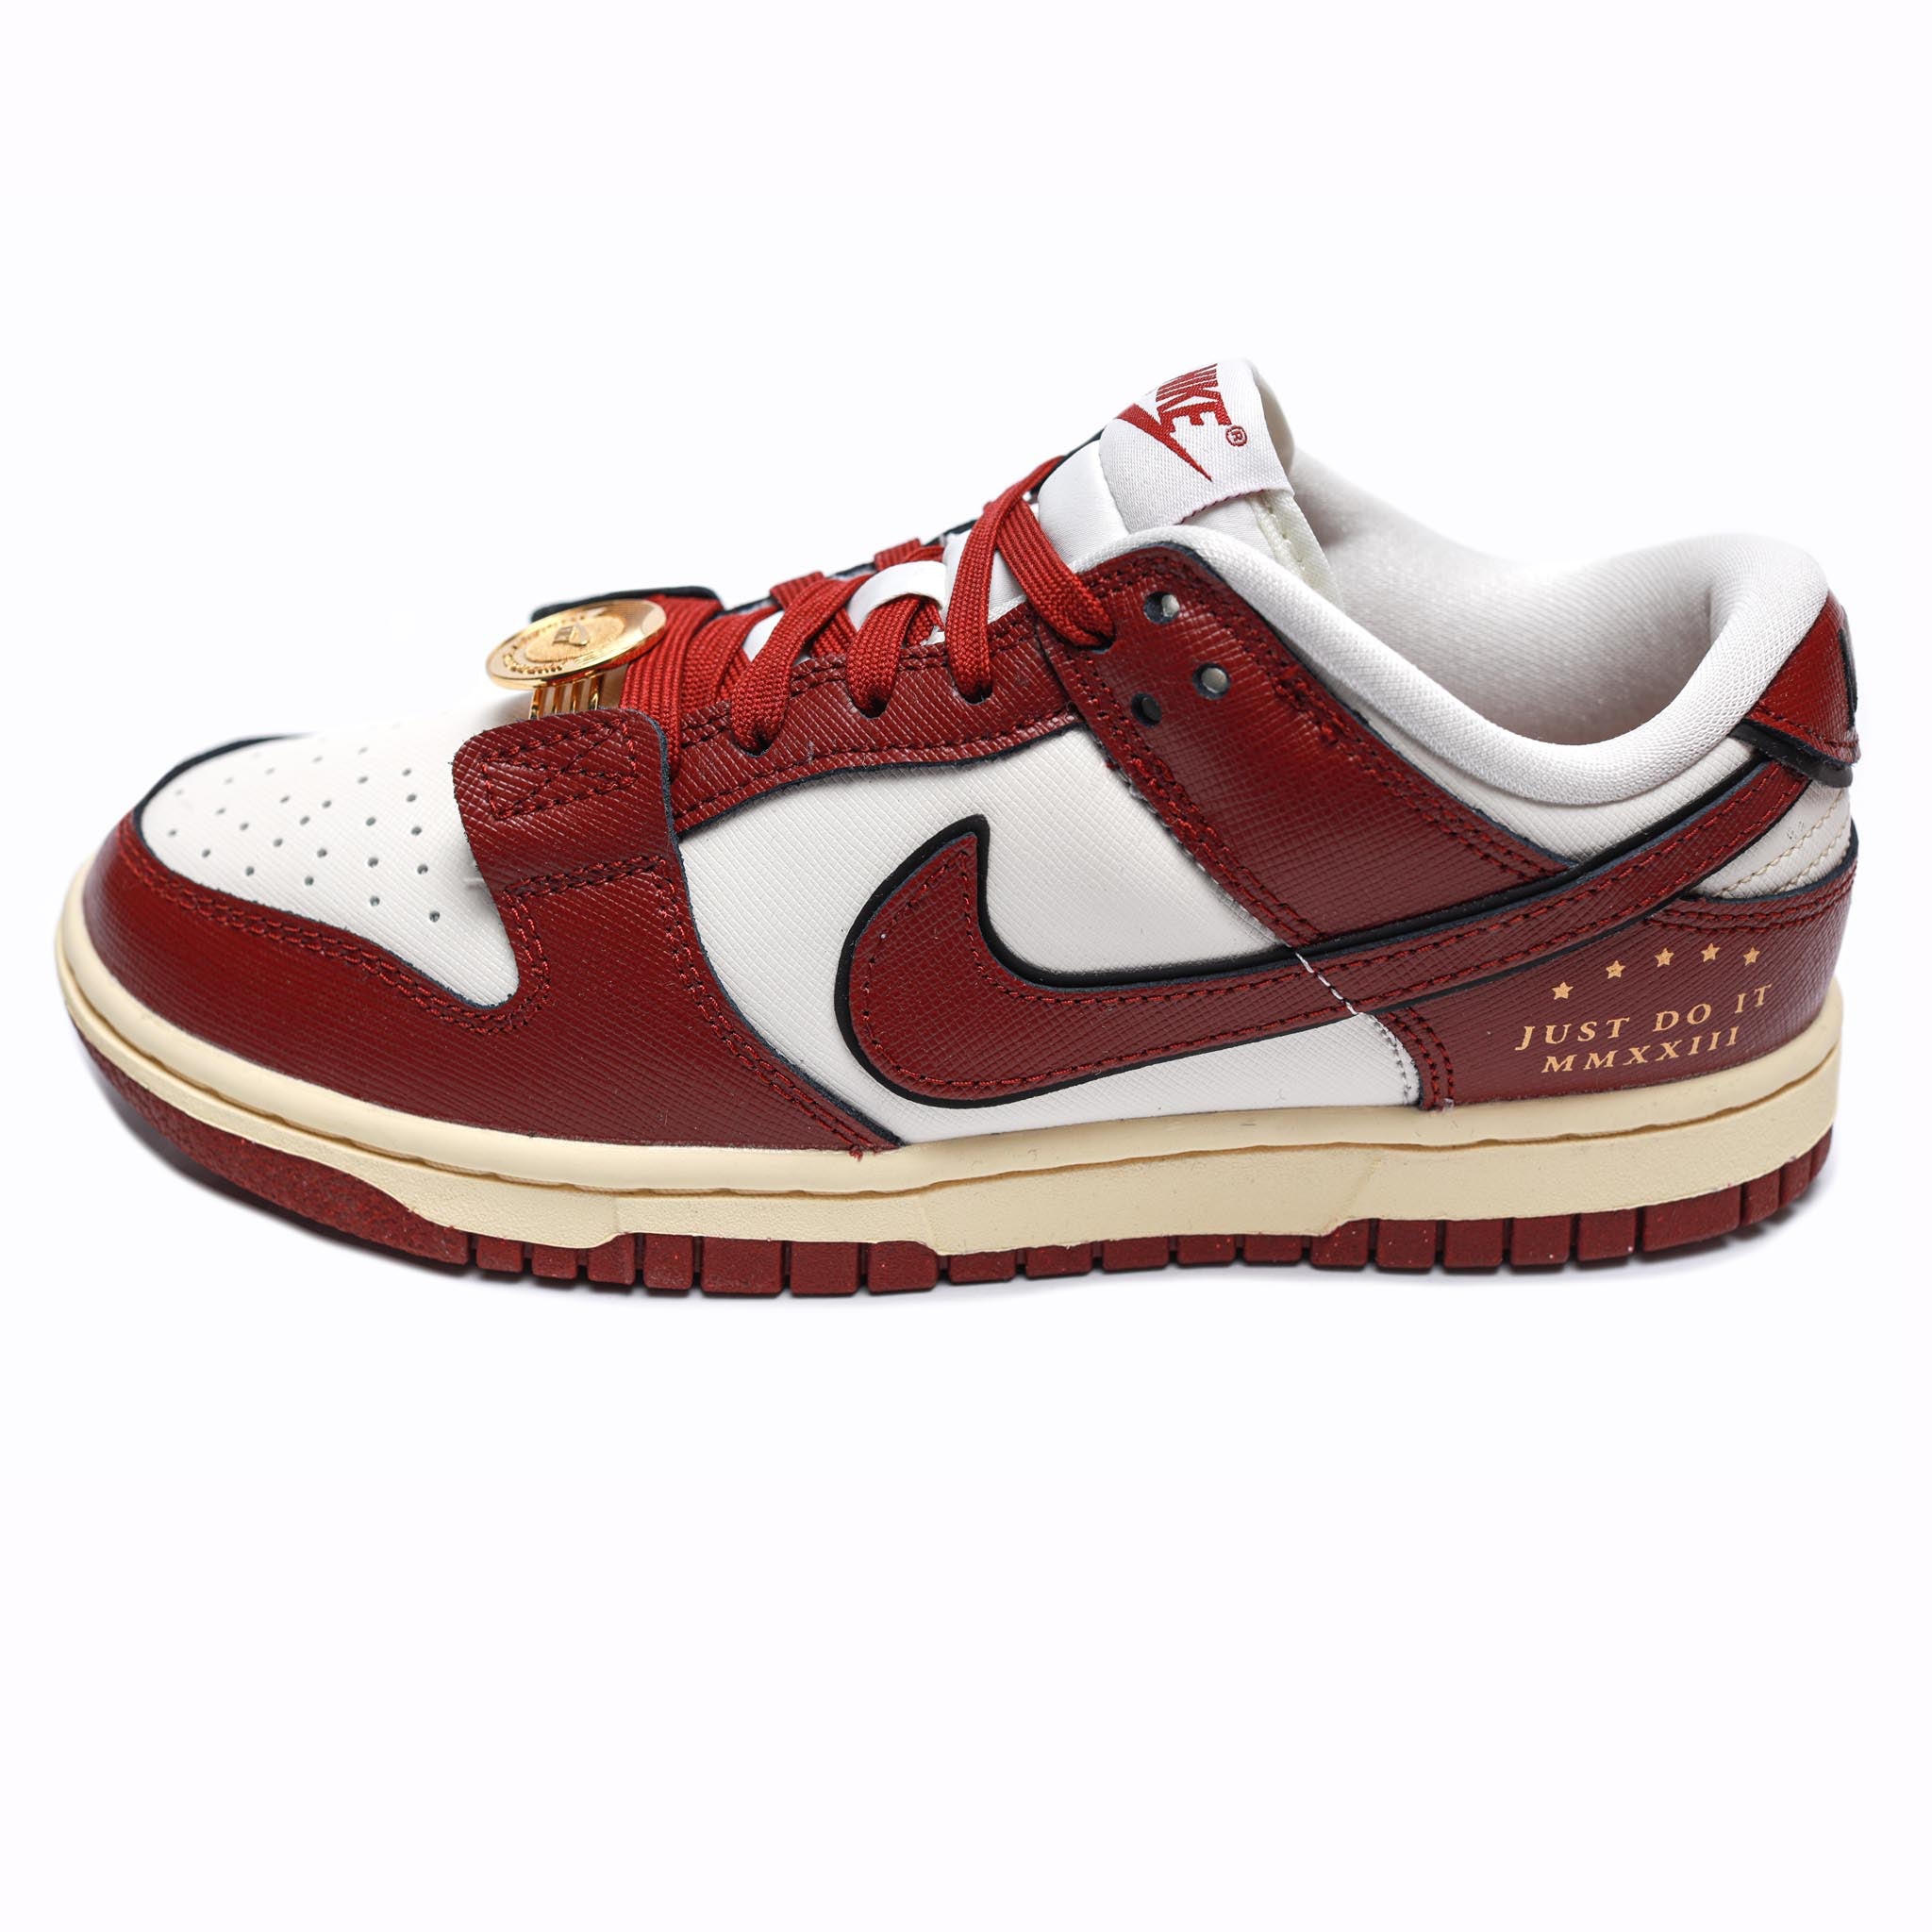 Nike Dunk Low SE Womens 'Just Do It' Sail/Team Red